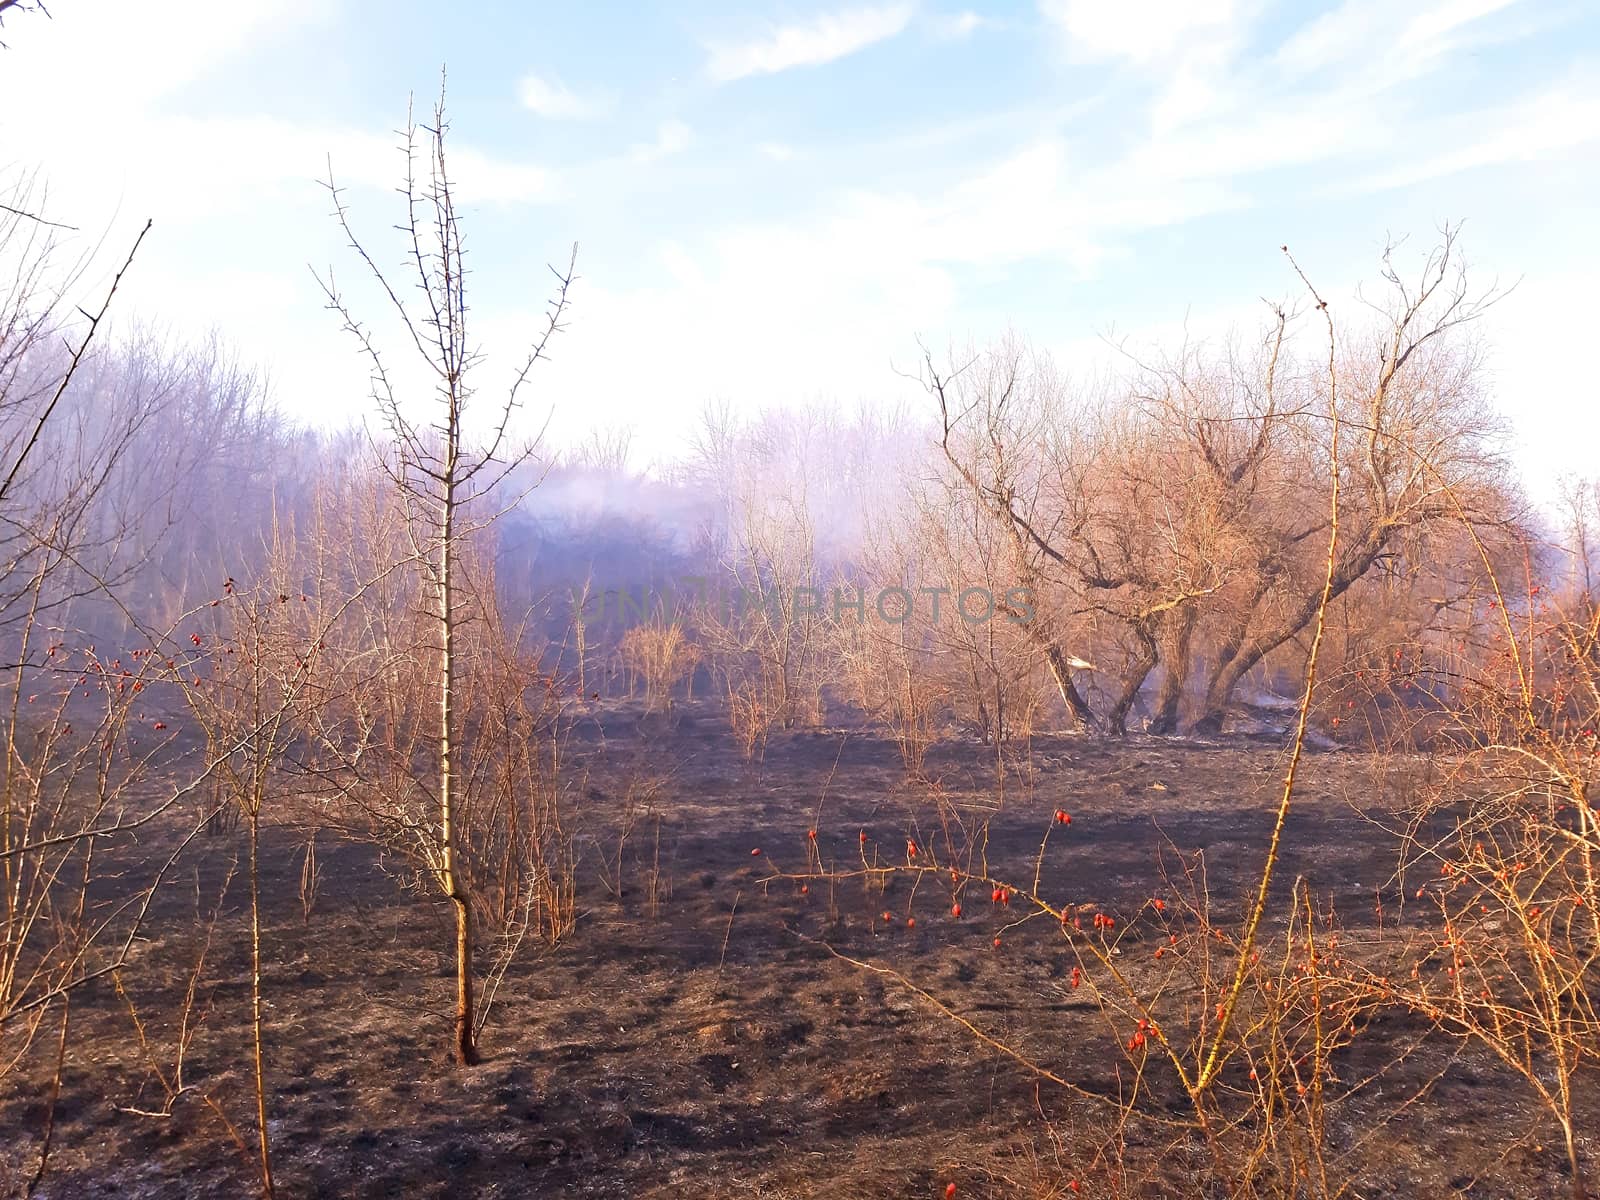 Burning dry grass in the forest, natural disaster by Mindru